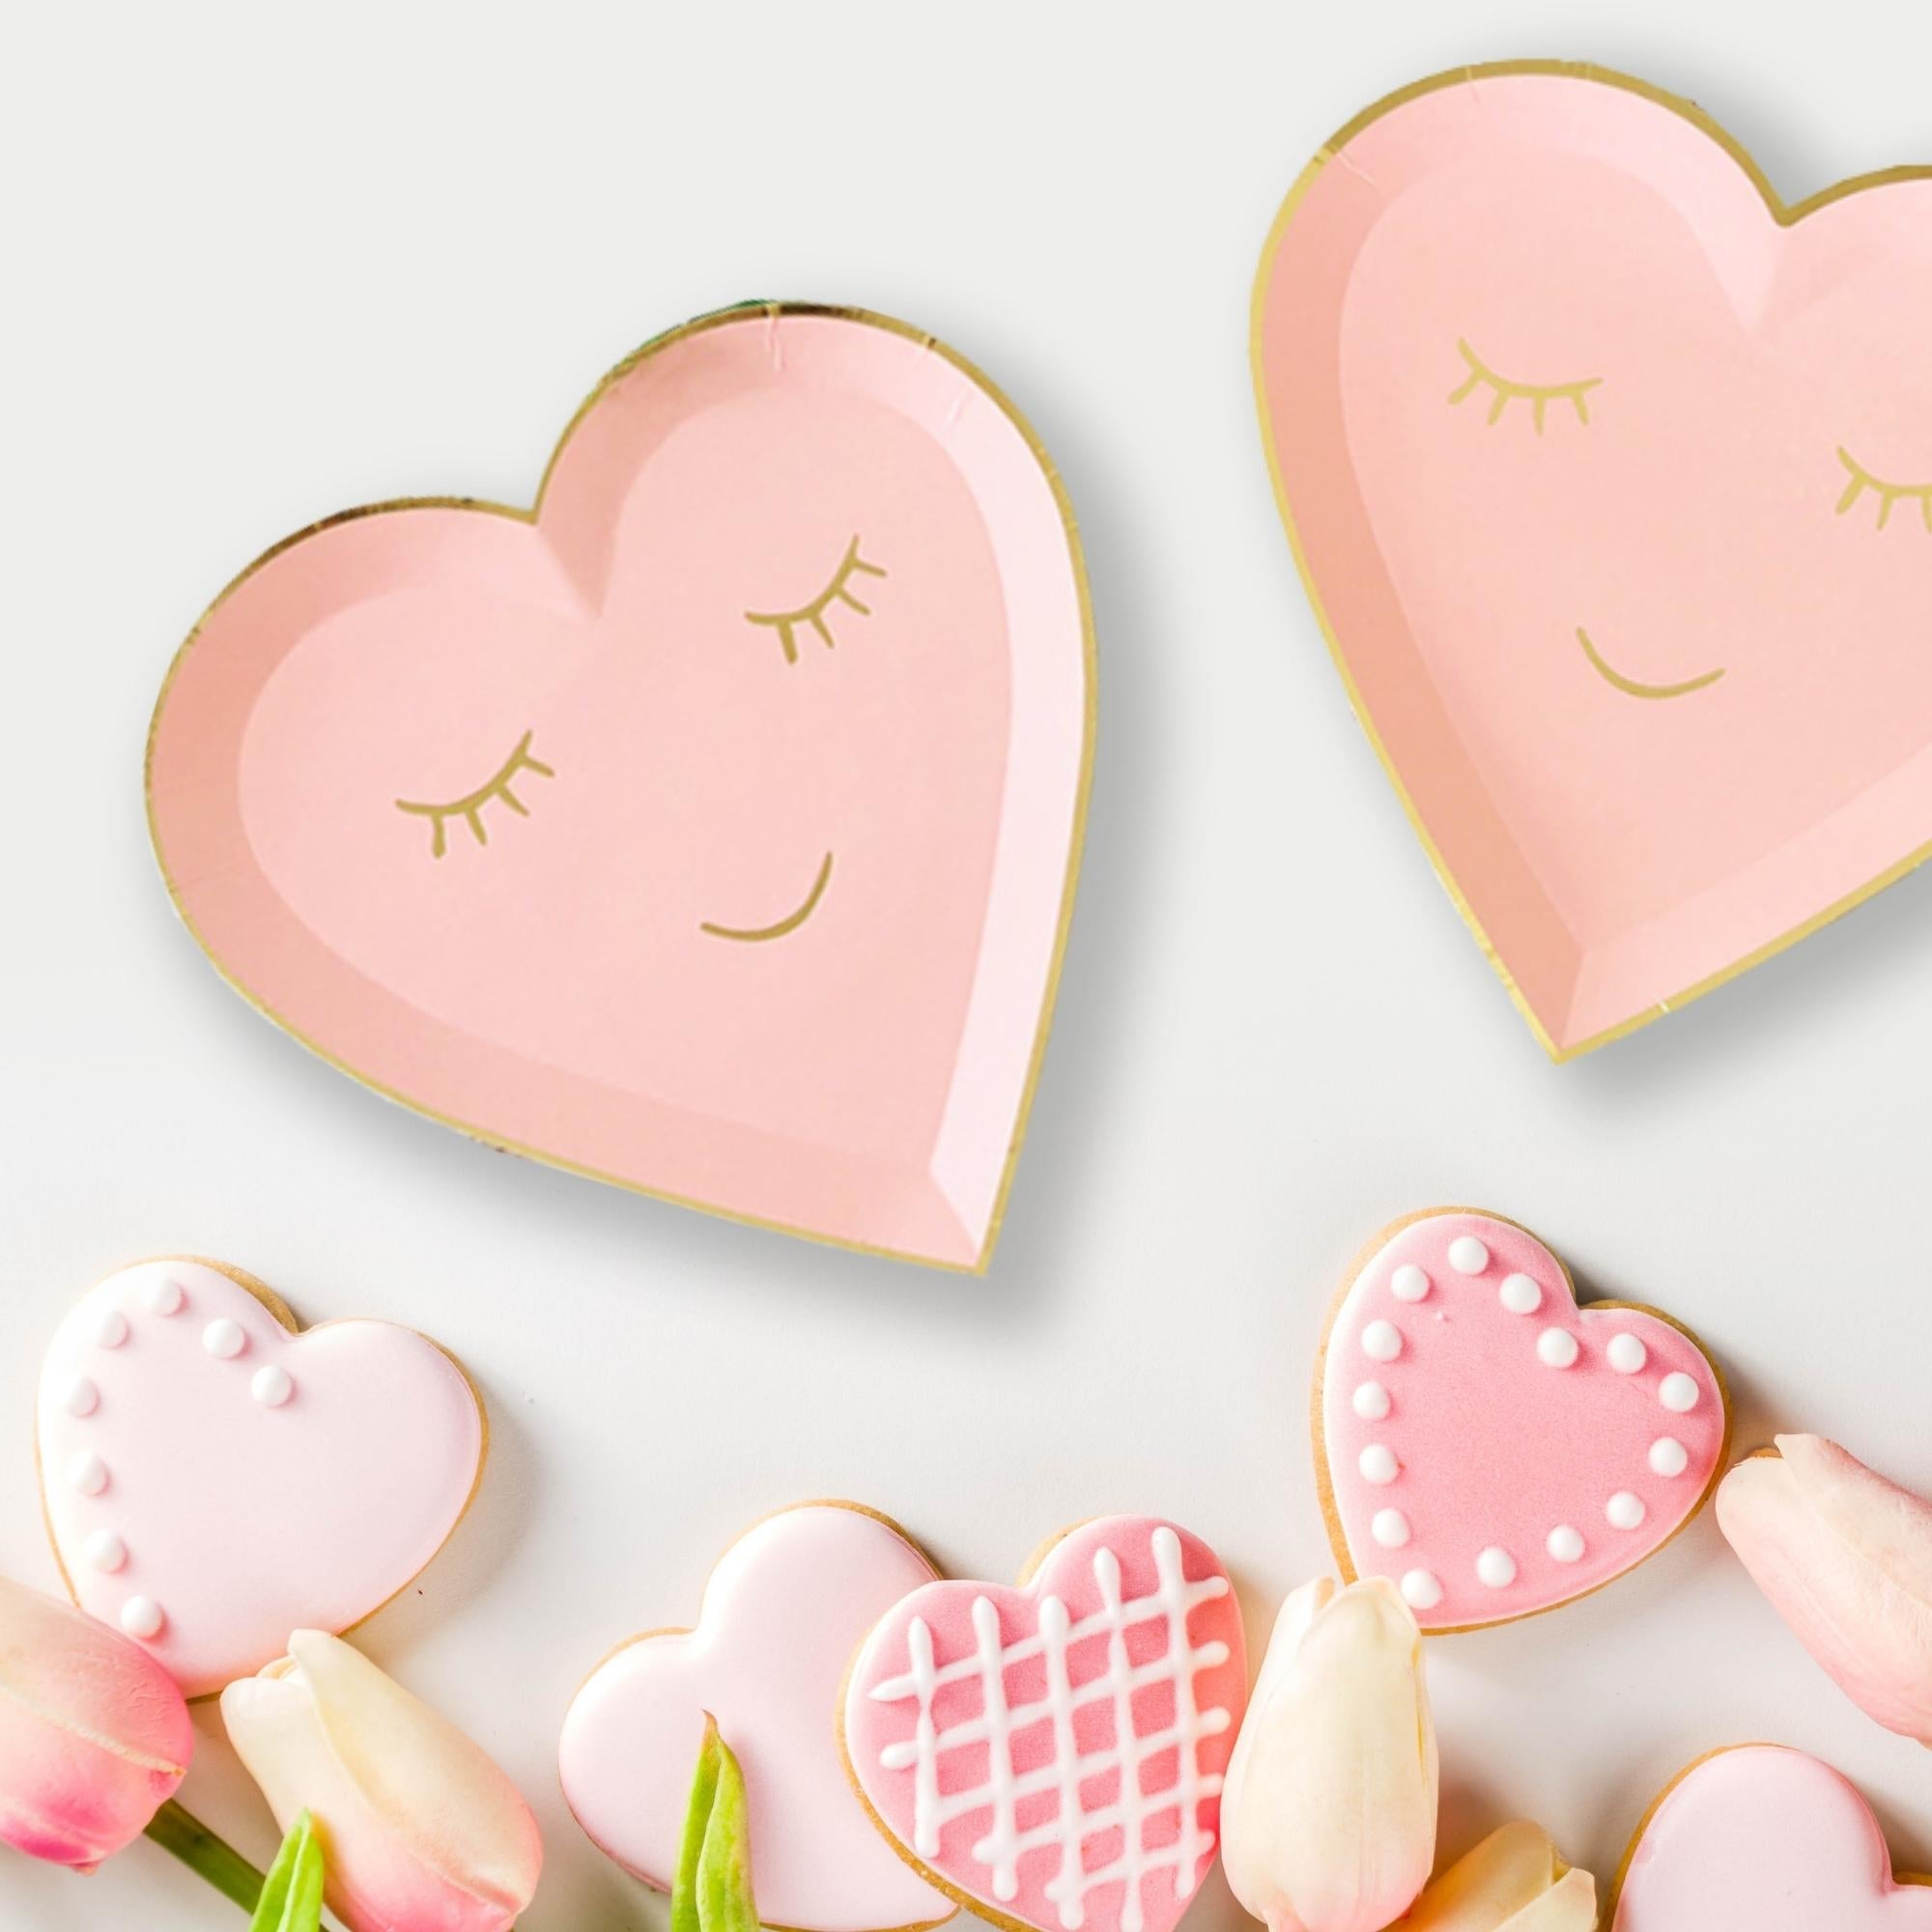 Pastel Pink Heart Shaped Paper Plates (Set of 8)